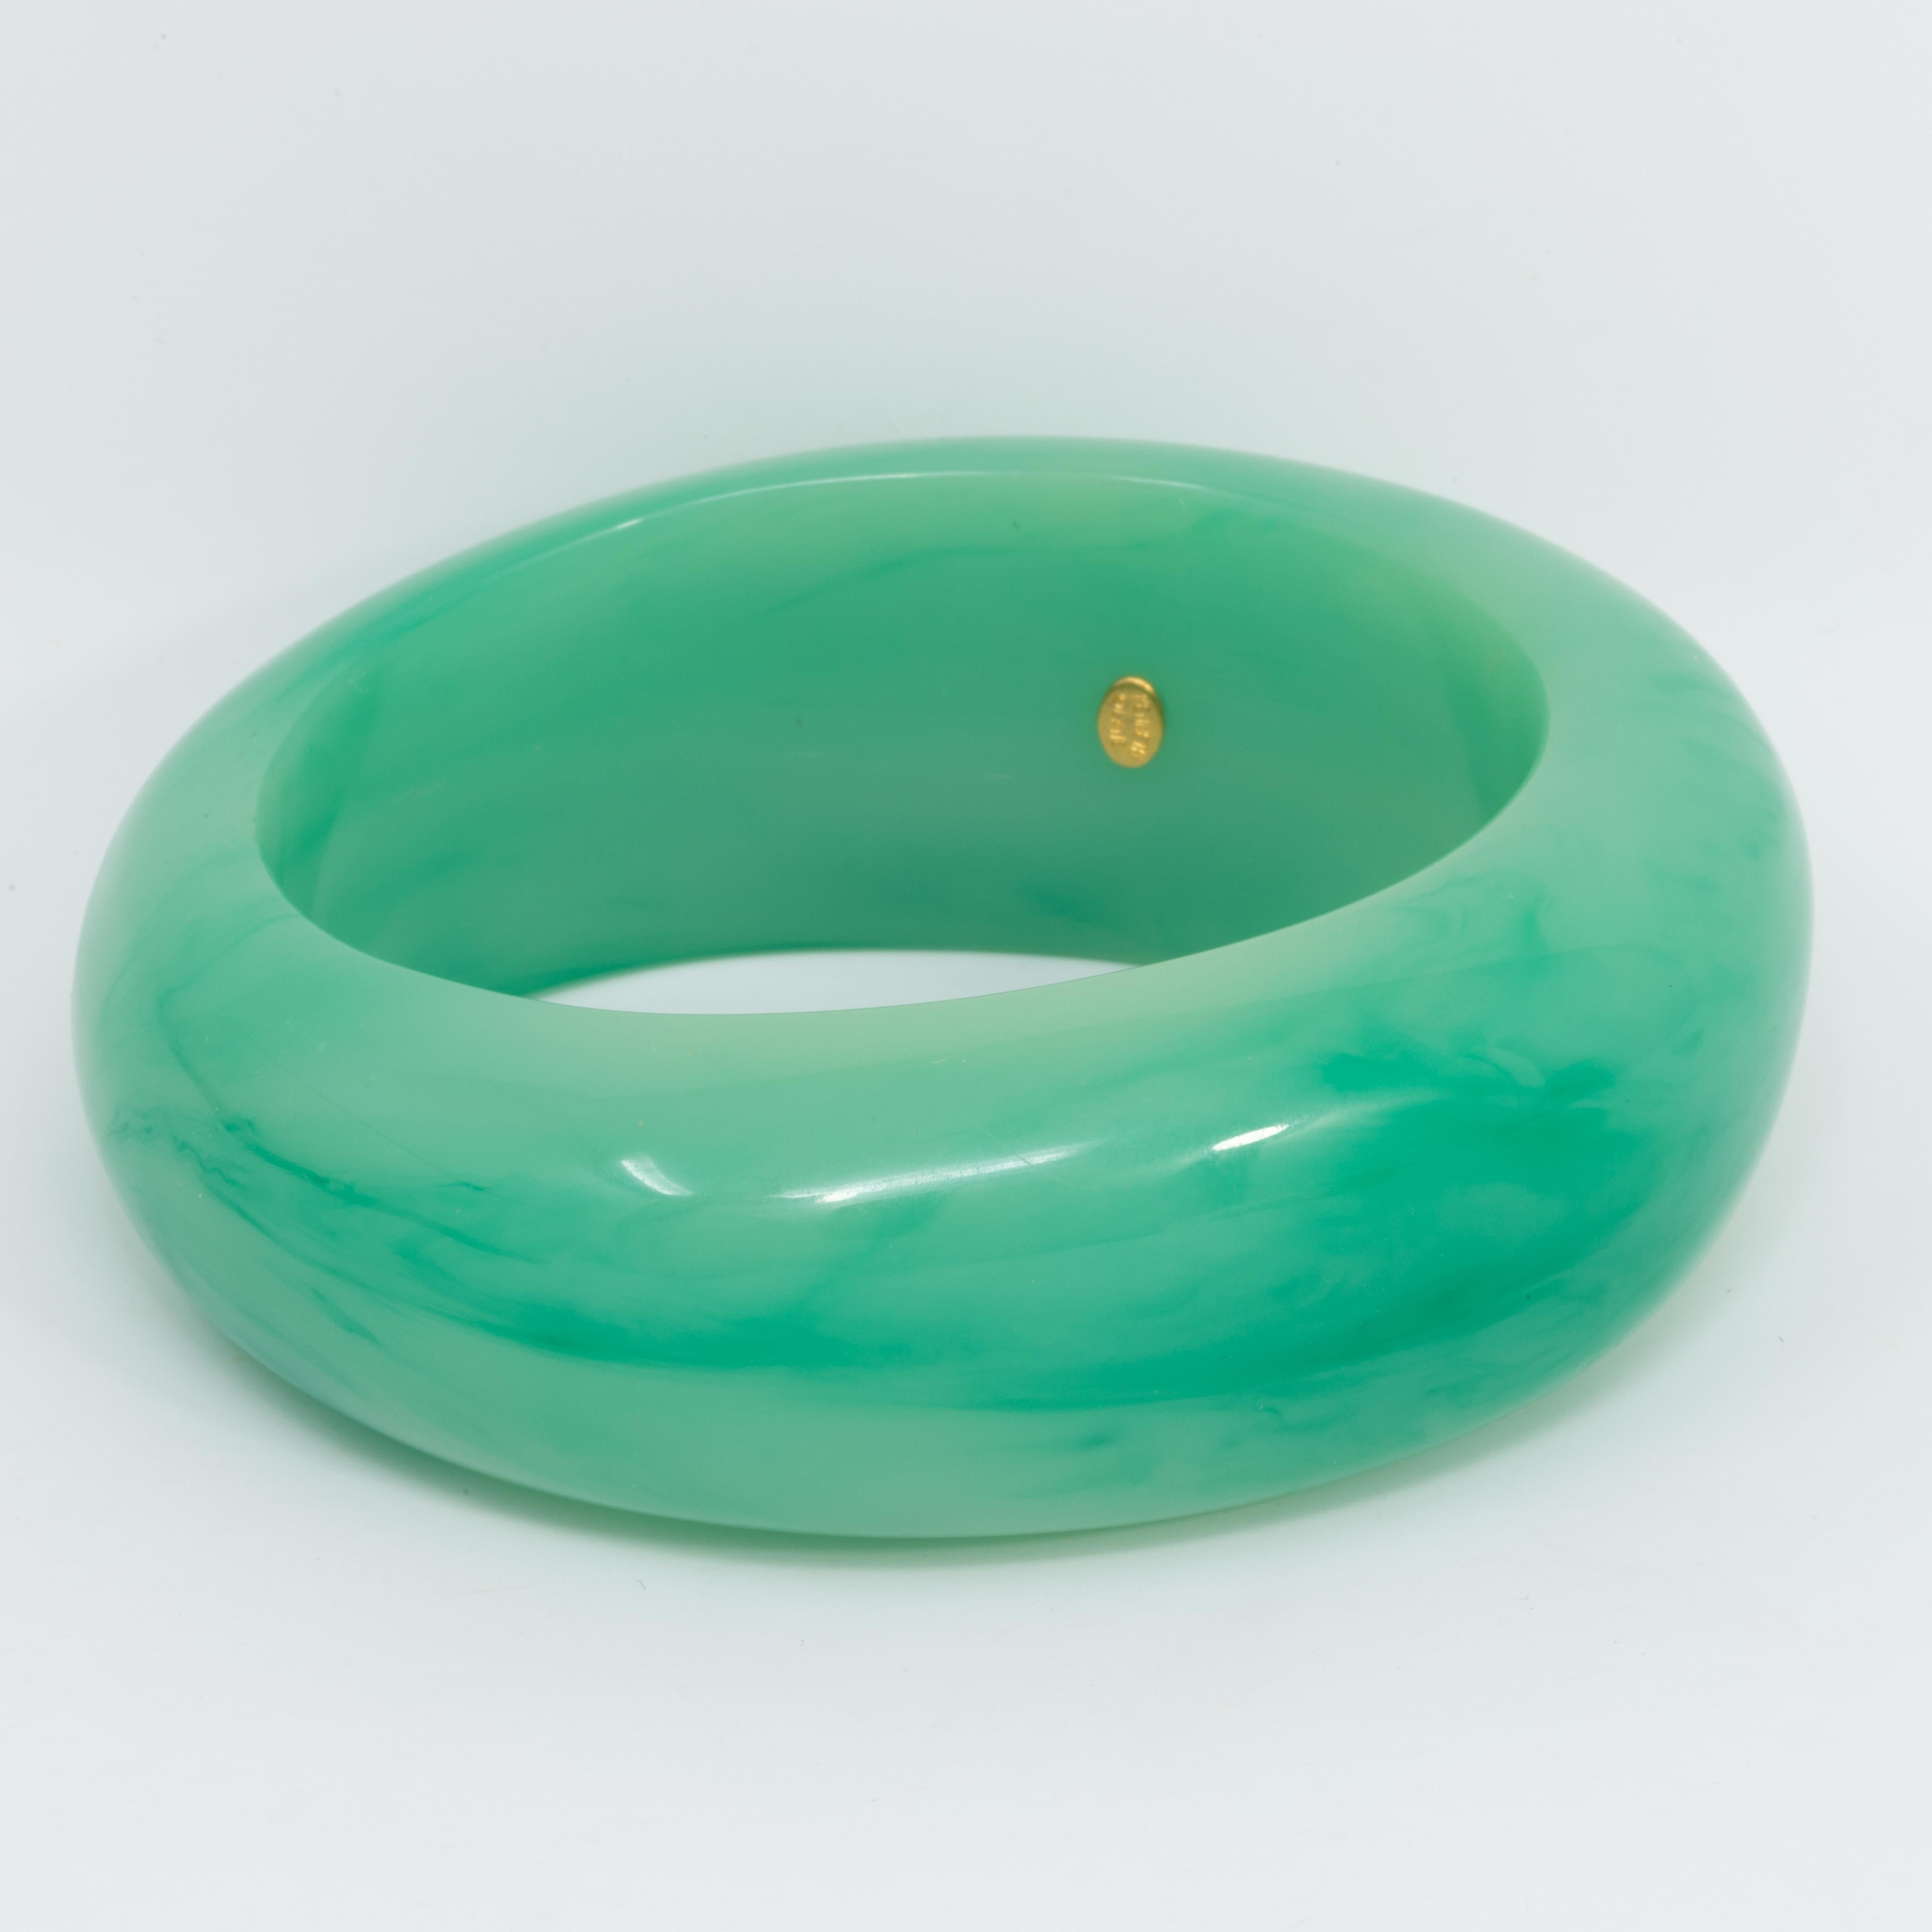 Art deco style asymmetrical style bangle bracelet by Kenneth Jay Lane in luxurious faux jade. 

Inner circumference: 7.75 inches
Inner diameter at widest part: 2.75 inches

Marks / hallmarks / etc: Kenneth Lane